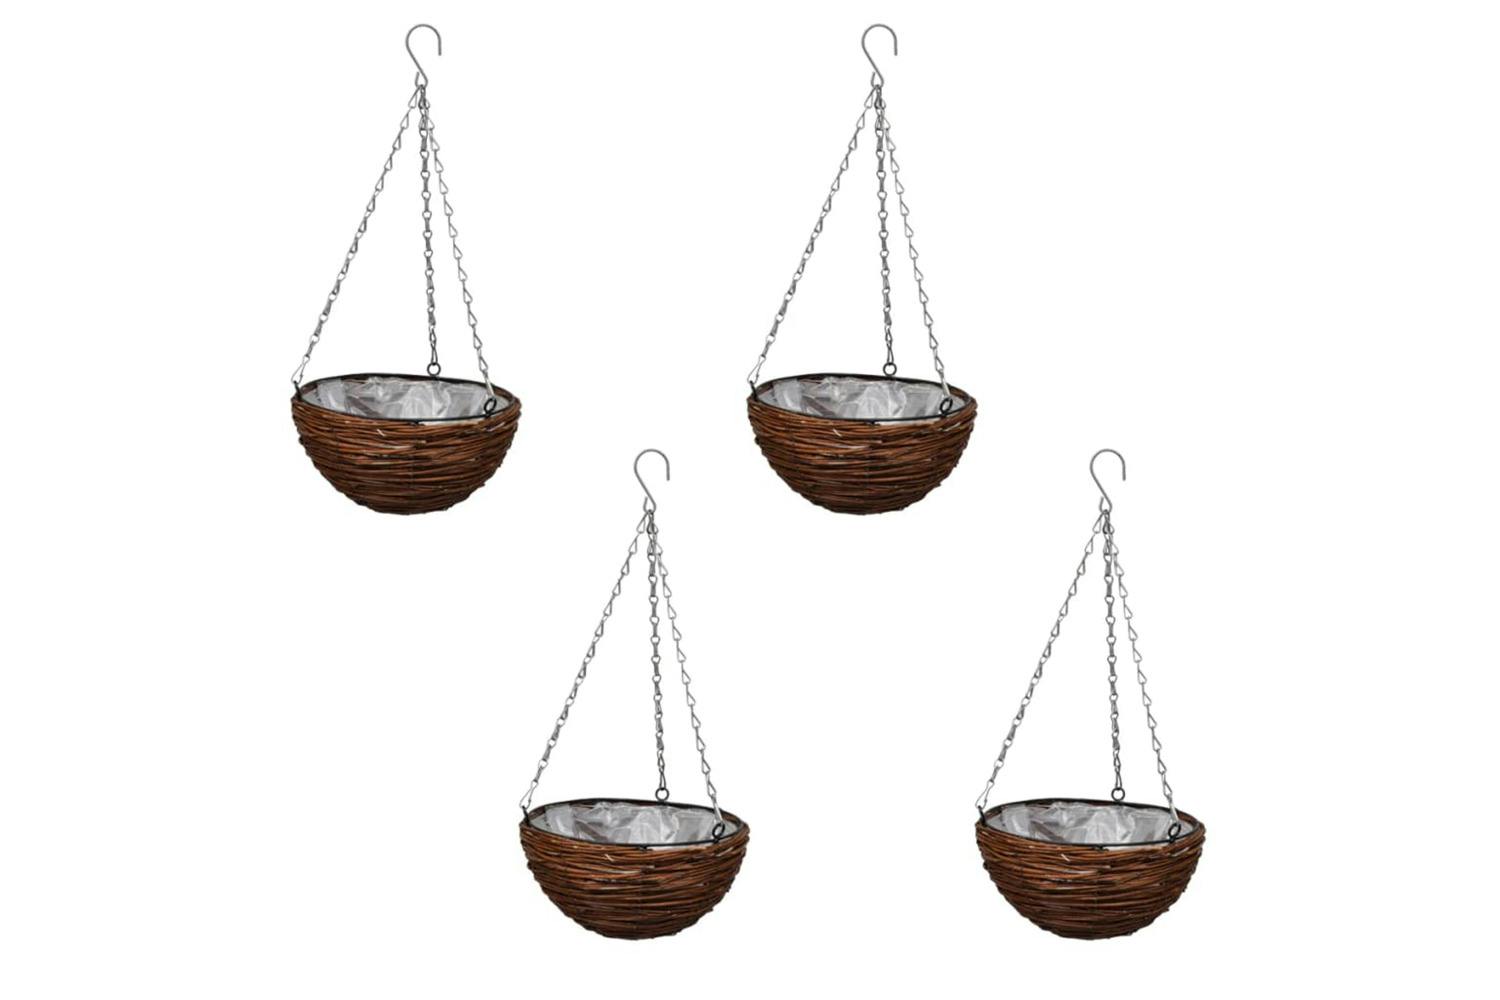 Vidaxl 140915 Hanging Round Willow Basket 4 Pcs With Liner & Chain